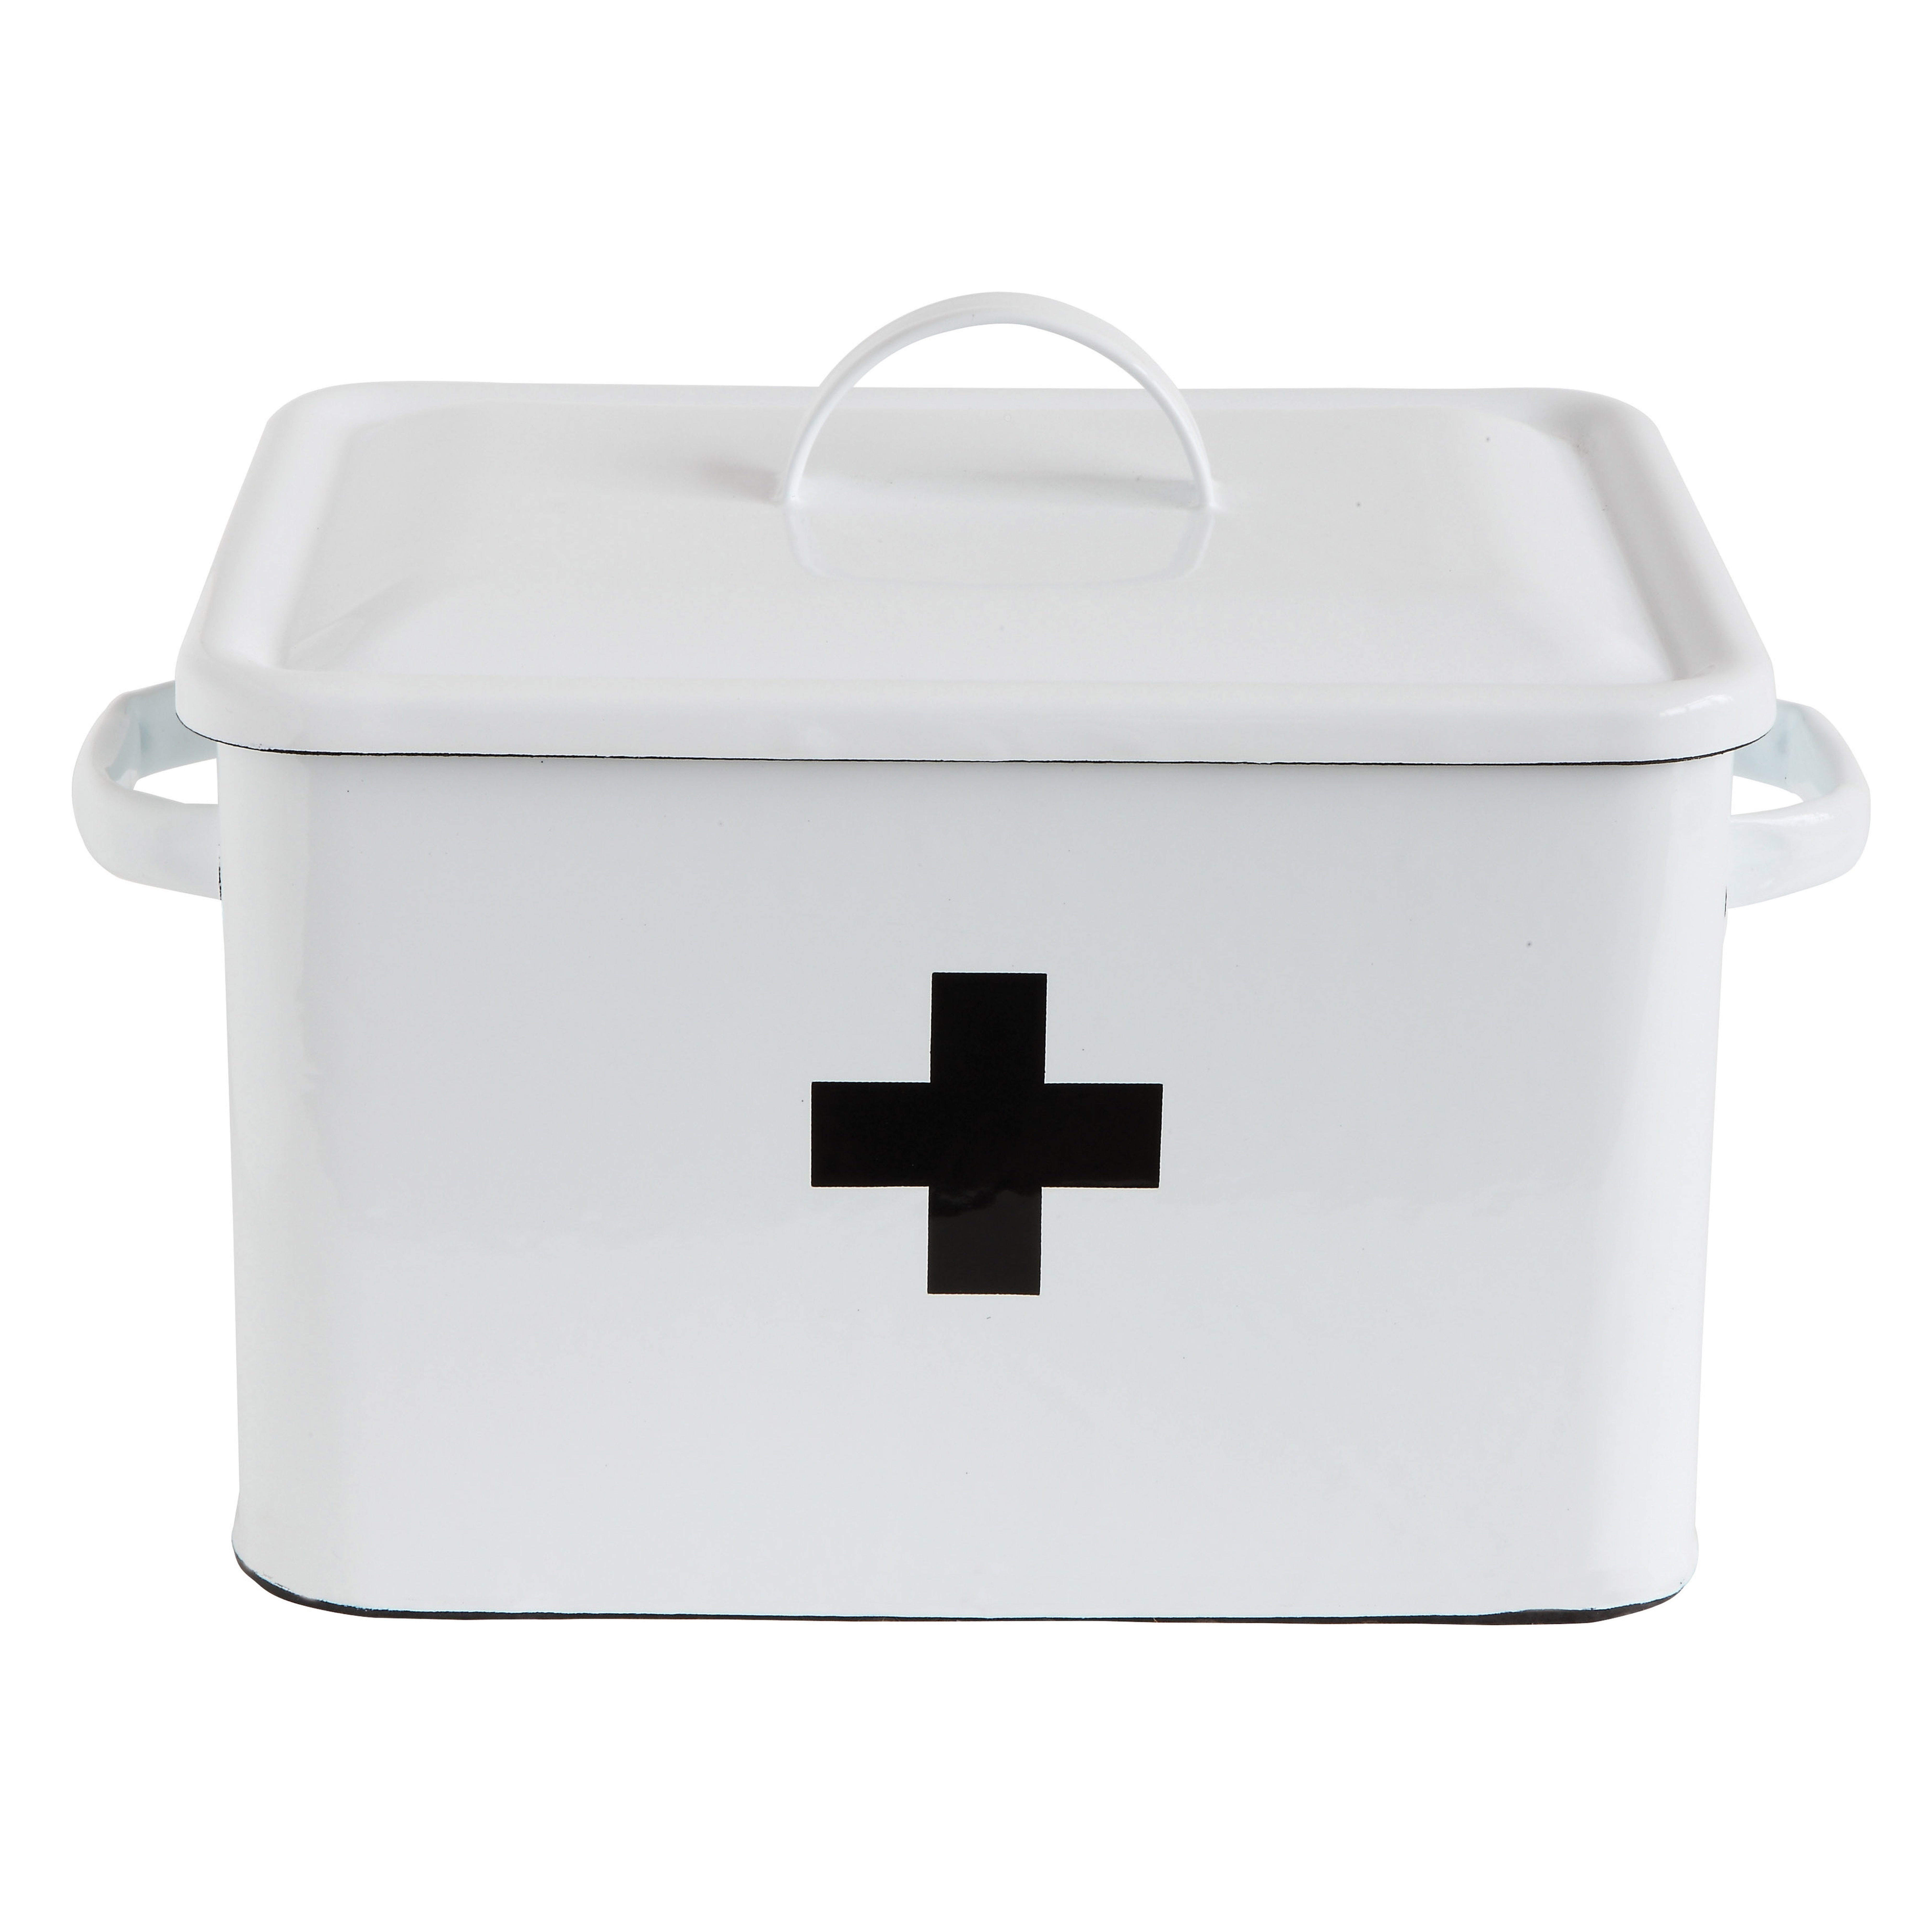 Enameled First Aid Box with Lid & Black Cross on Front - Nomad Home